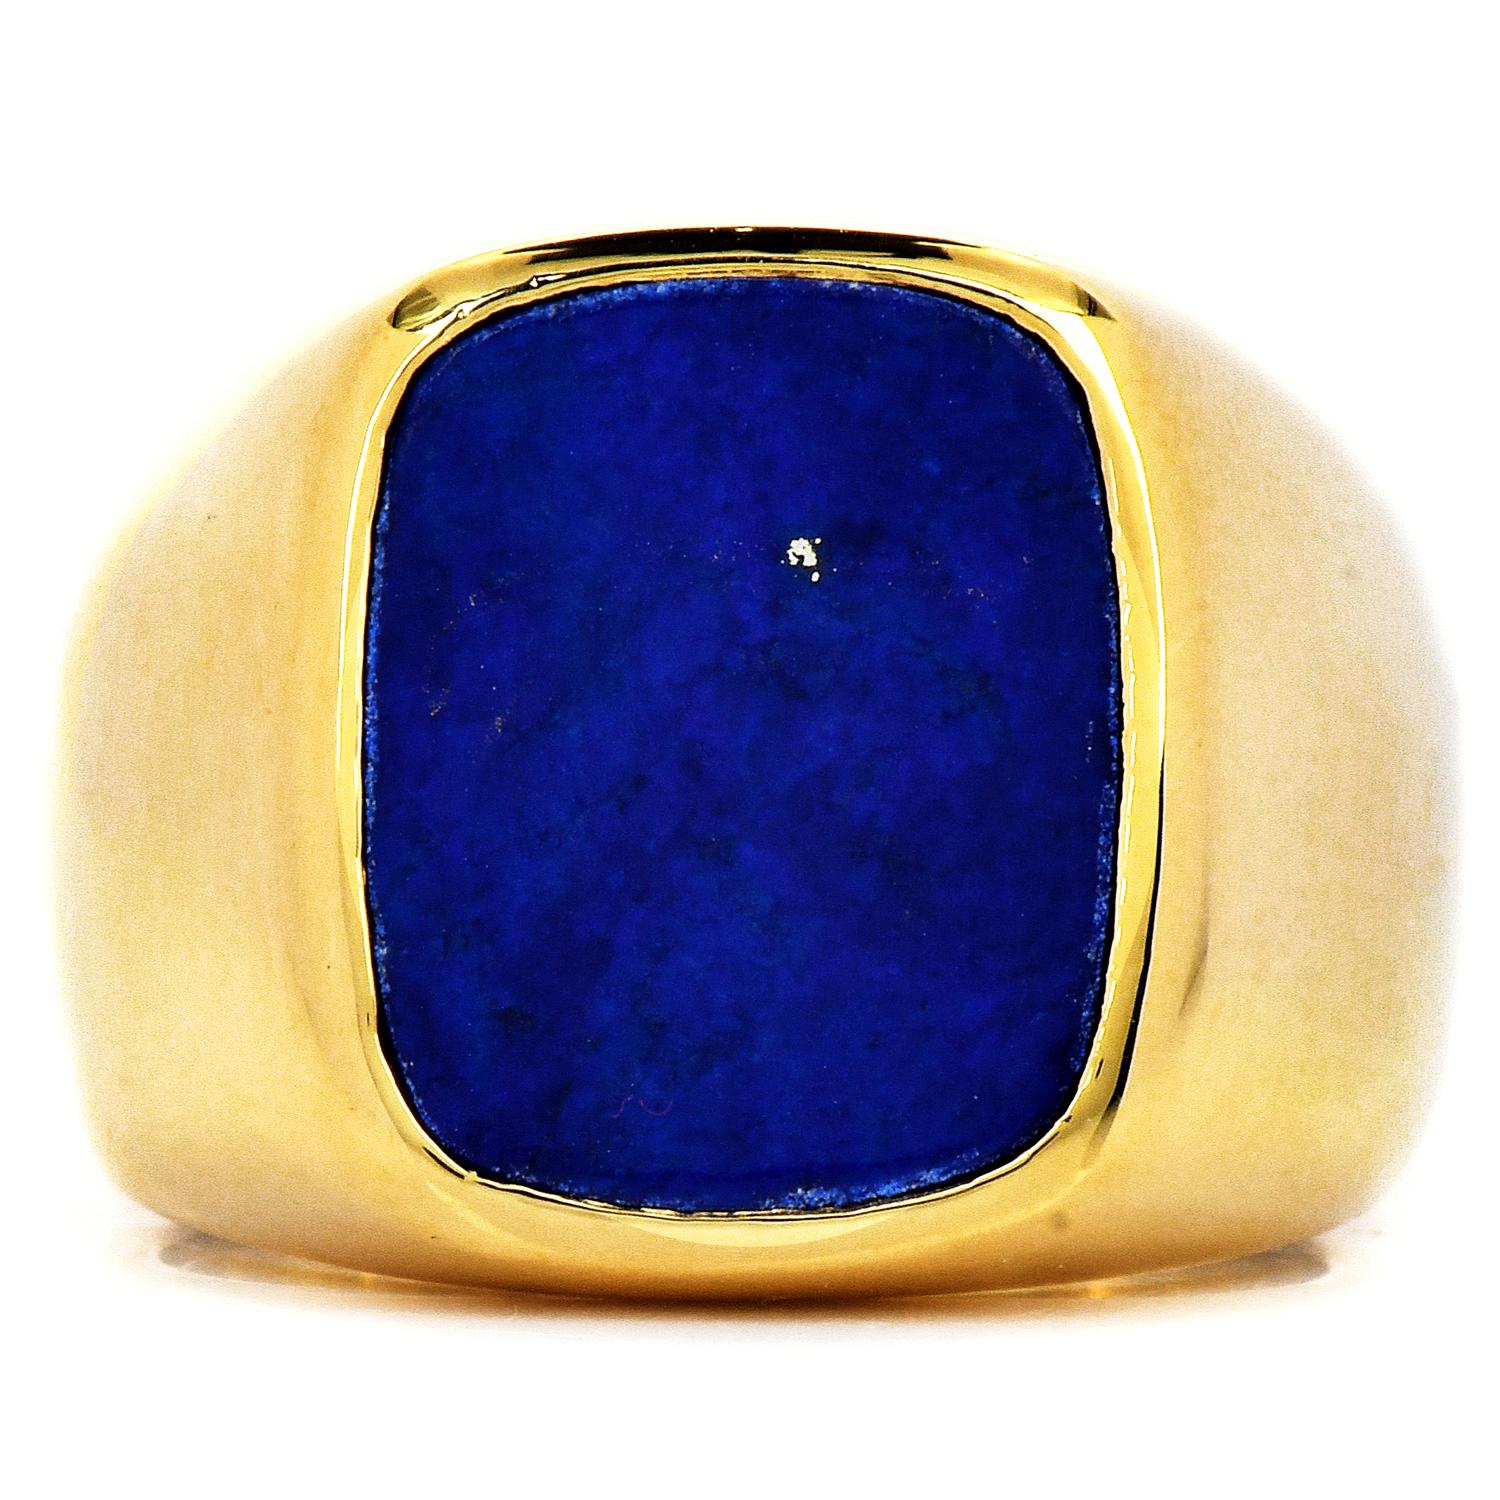 This Elegant Vintage David Webb Gentlemen's estate signet ring is the perfect gift for everyday wearing.

It can be personalized with a side signature or logo stamp.

Crafted in solid 18K yellow gold with a highly polished mirror-like